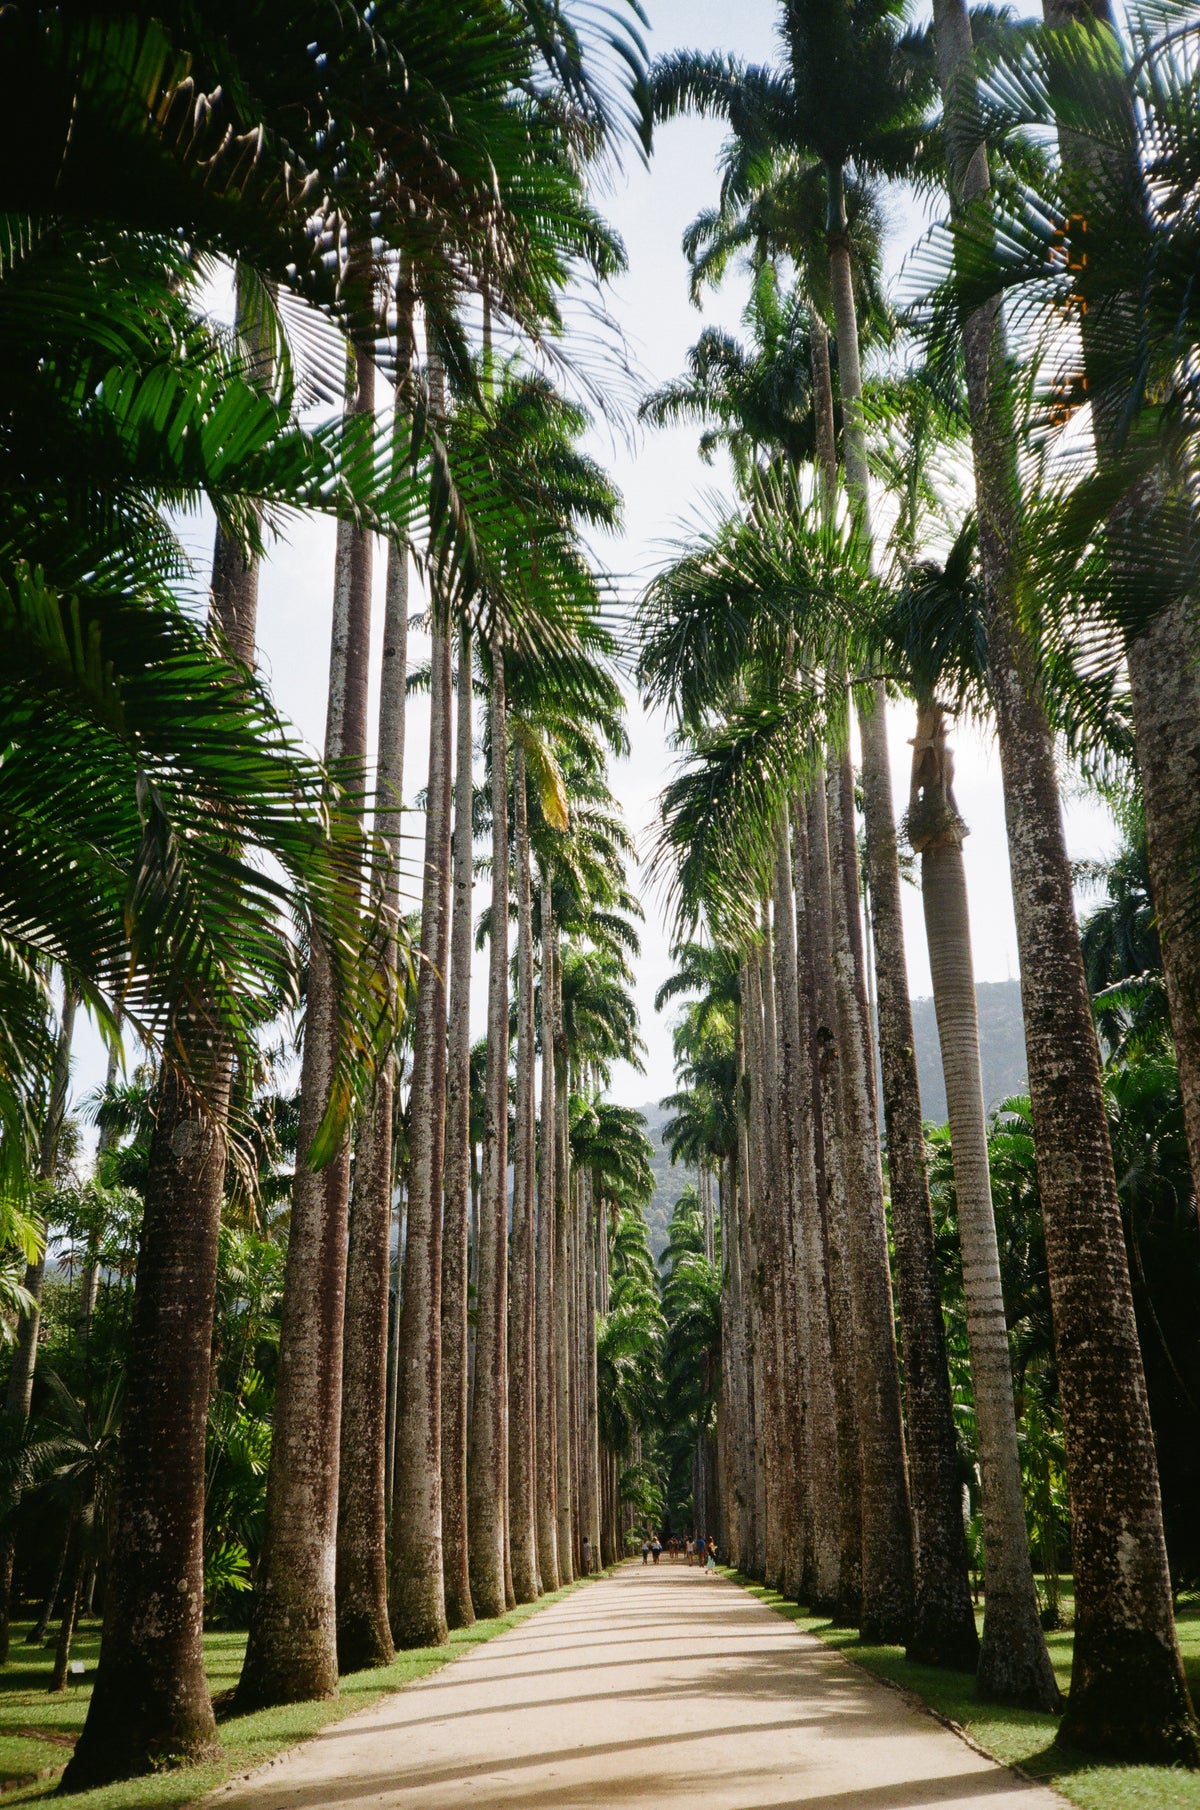 pathway lined in tall palm trees